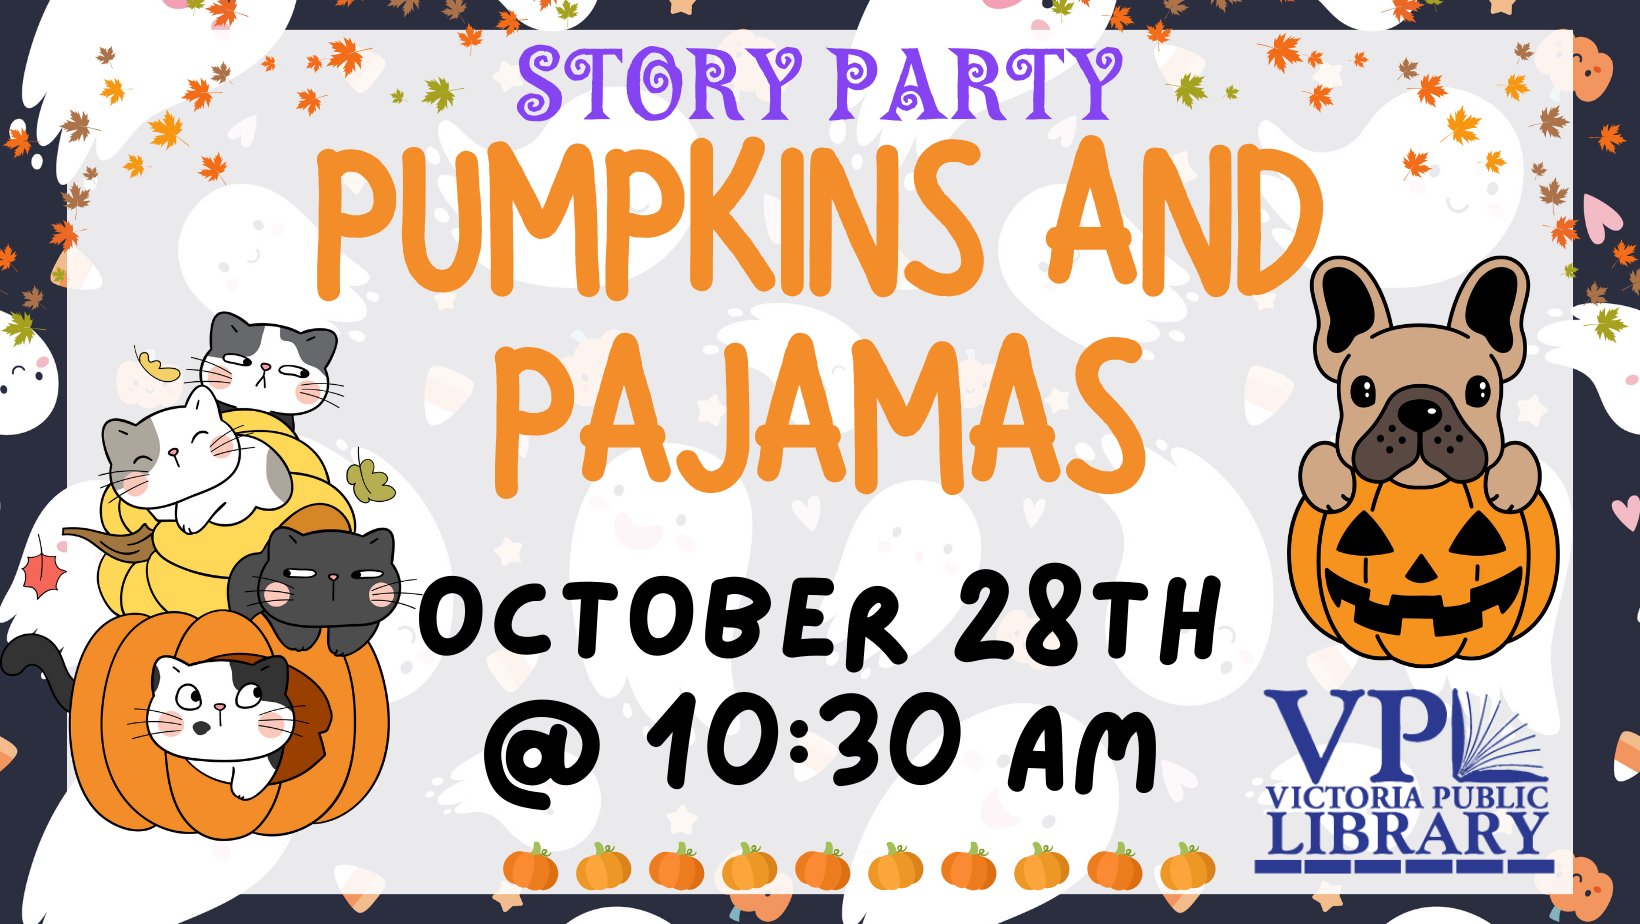 Get ready in your best spooky pajamas for this month’s story party! Story party is for children of all ages. Songs and rhymes will be great quality time for all family members. Afterward, we have a spooky craft for you to create.